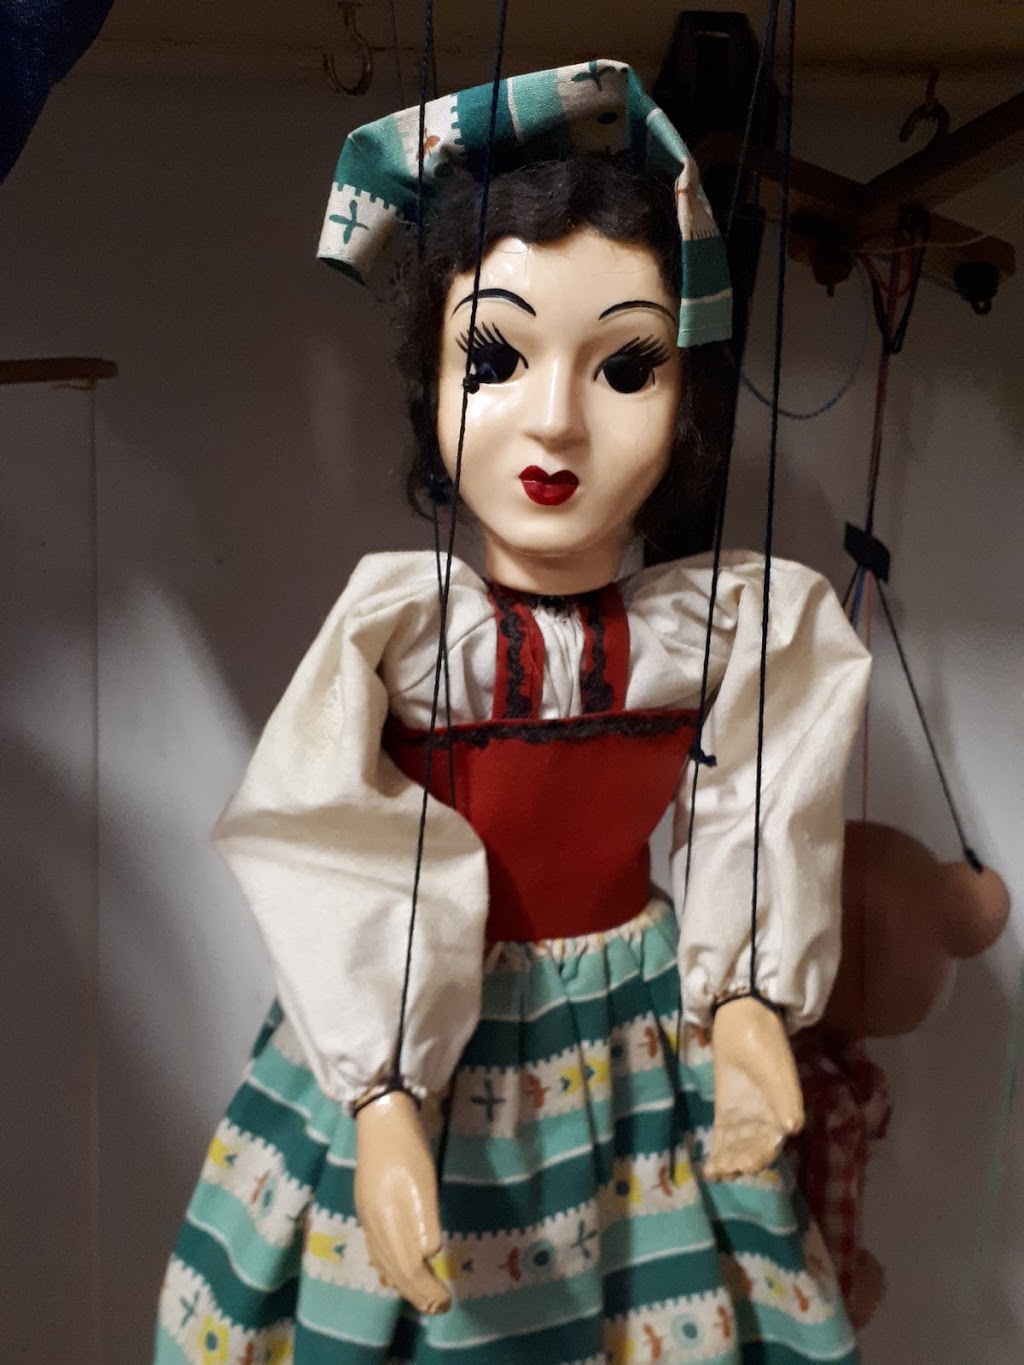 Sansouci Puppet Museum & Gallery | museum | 17 Main N Rd, Wilmington SA 5485, Australia | 0886675356 OR +61 8 8667 5356